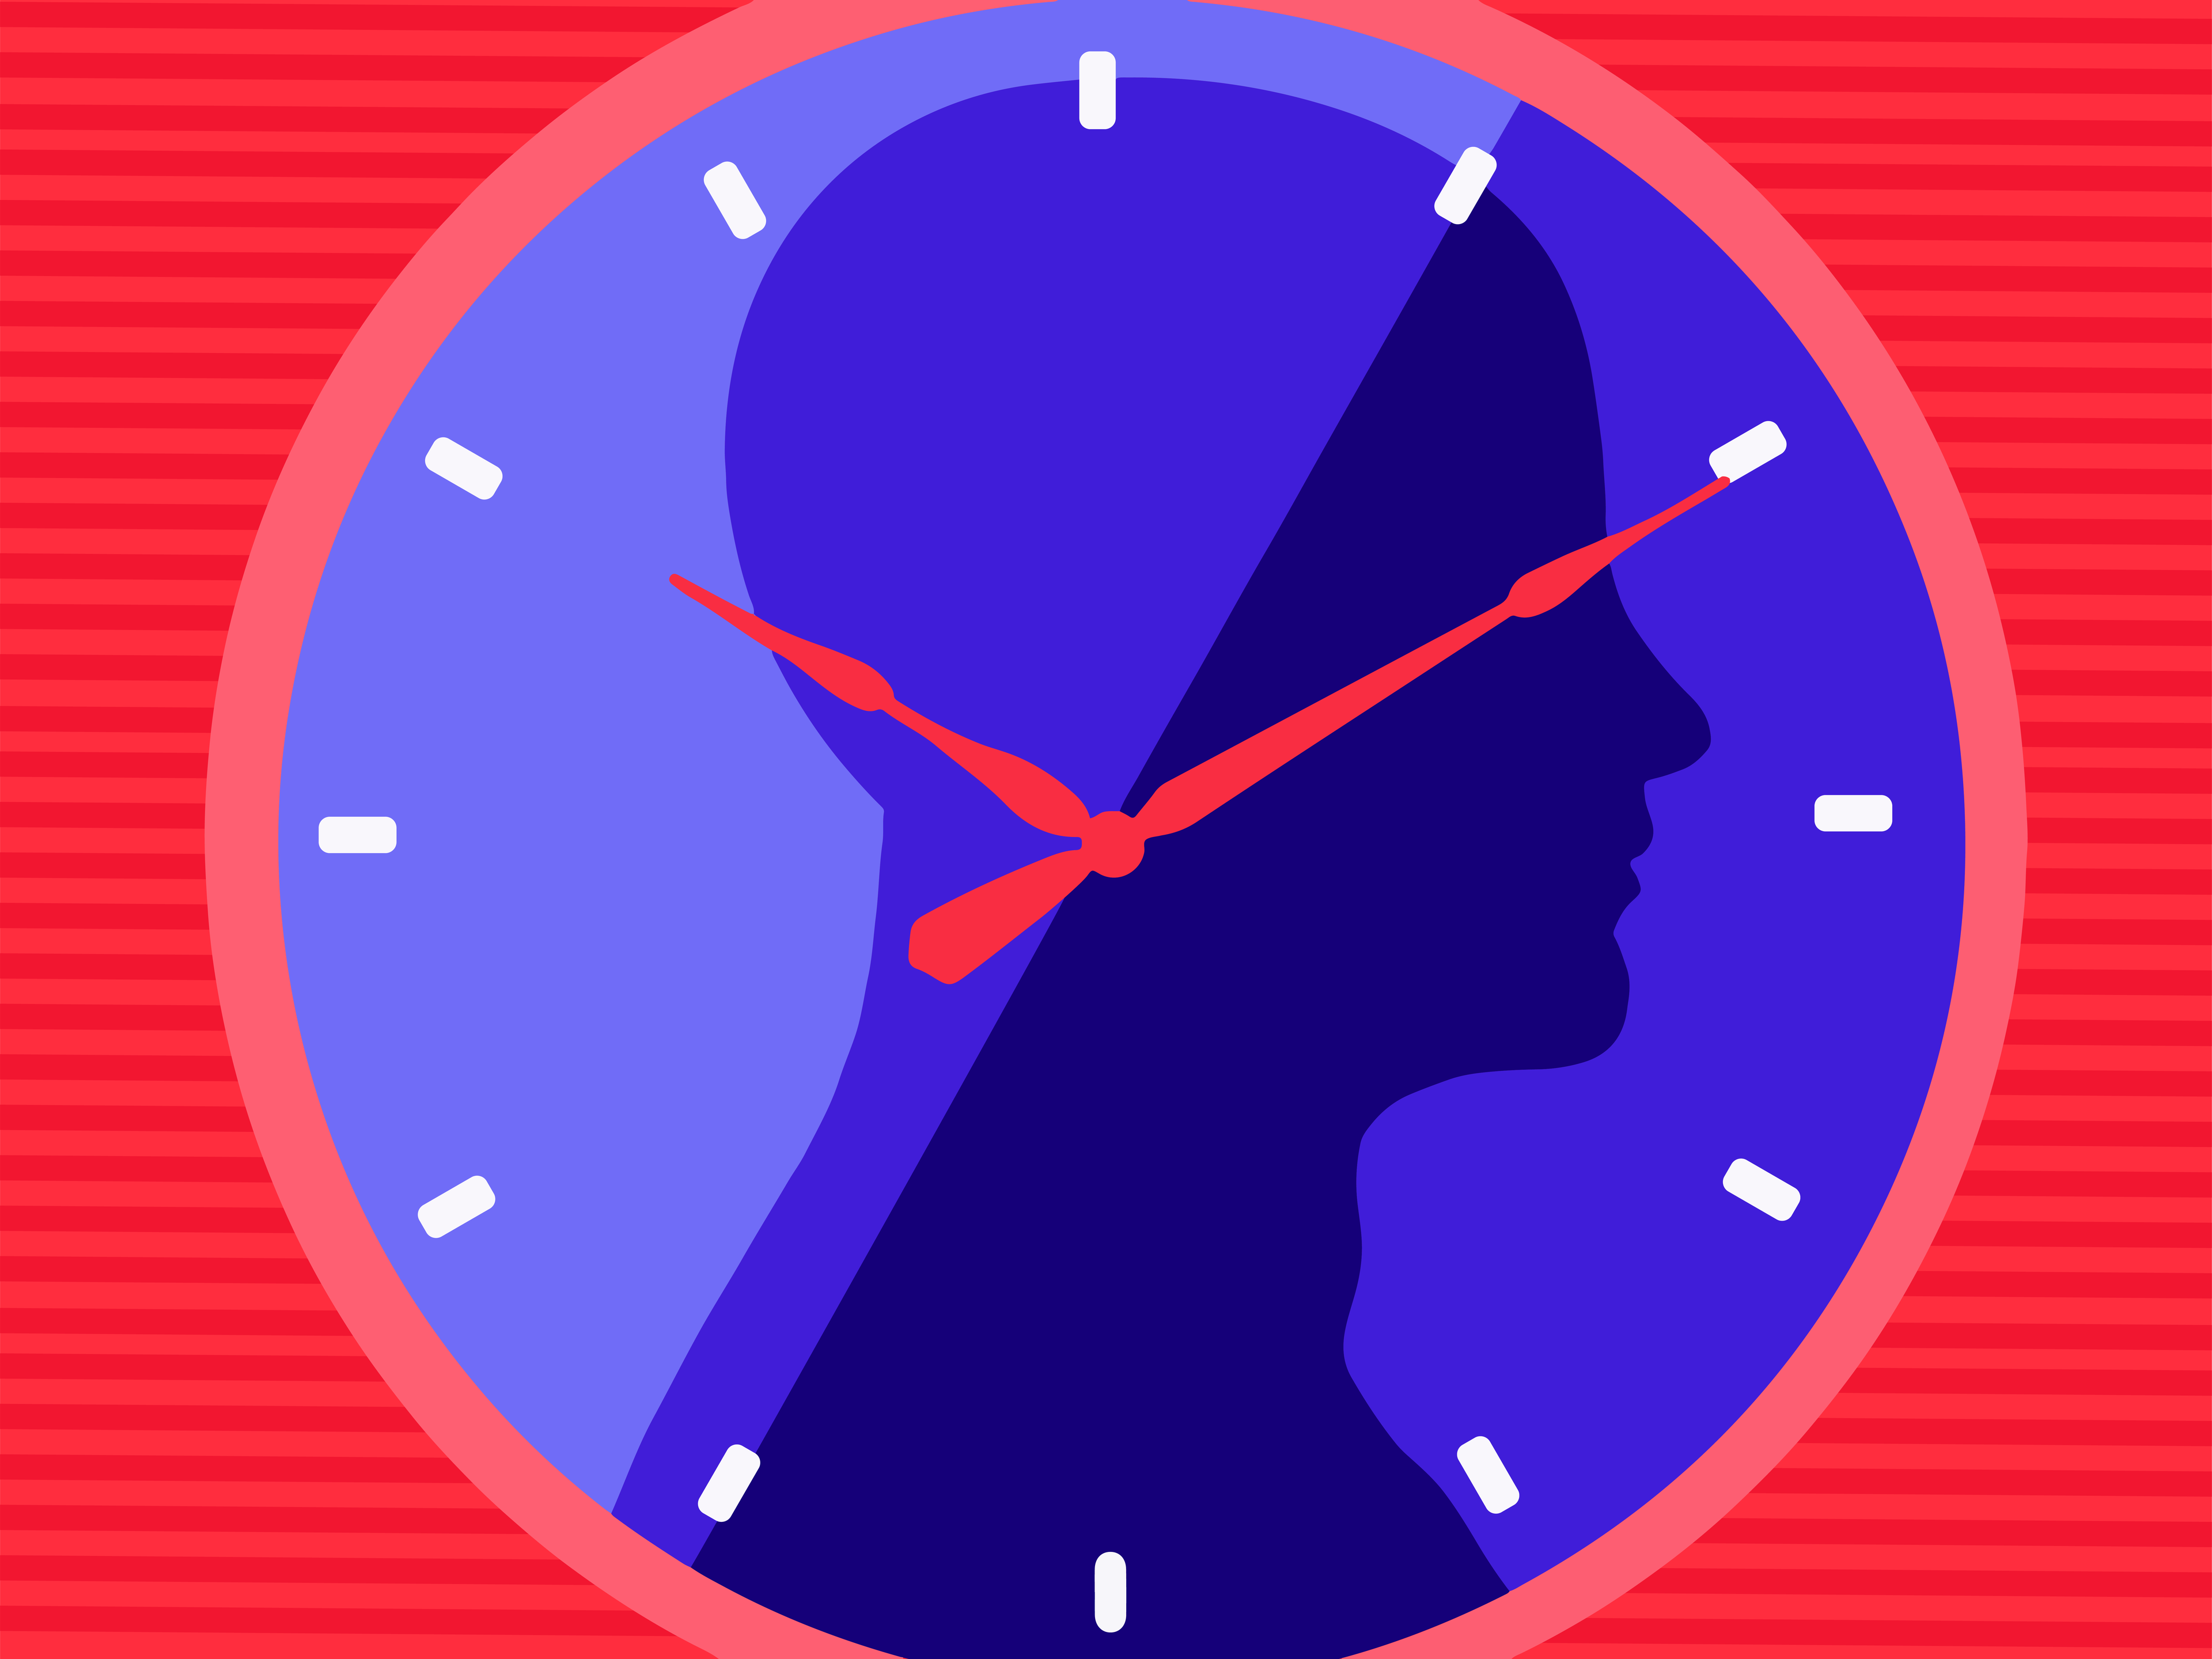 A clock with the outline of a head in its center to symbolize the human internal body clock.